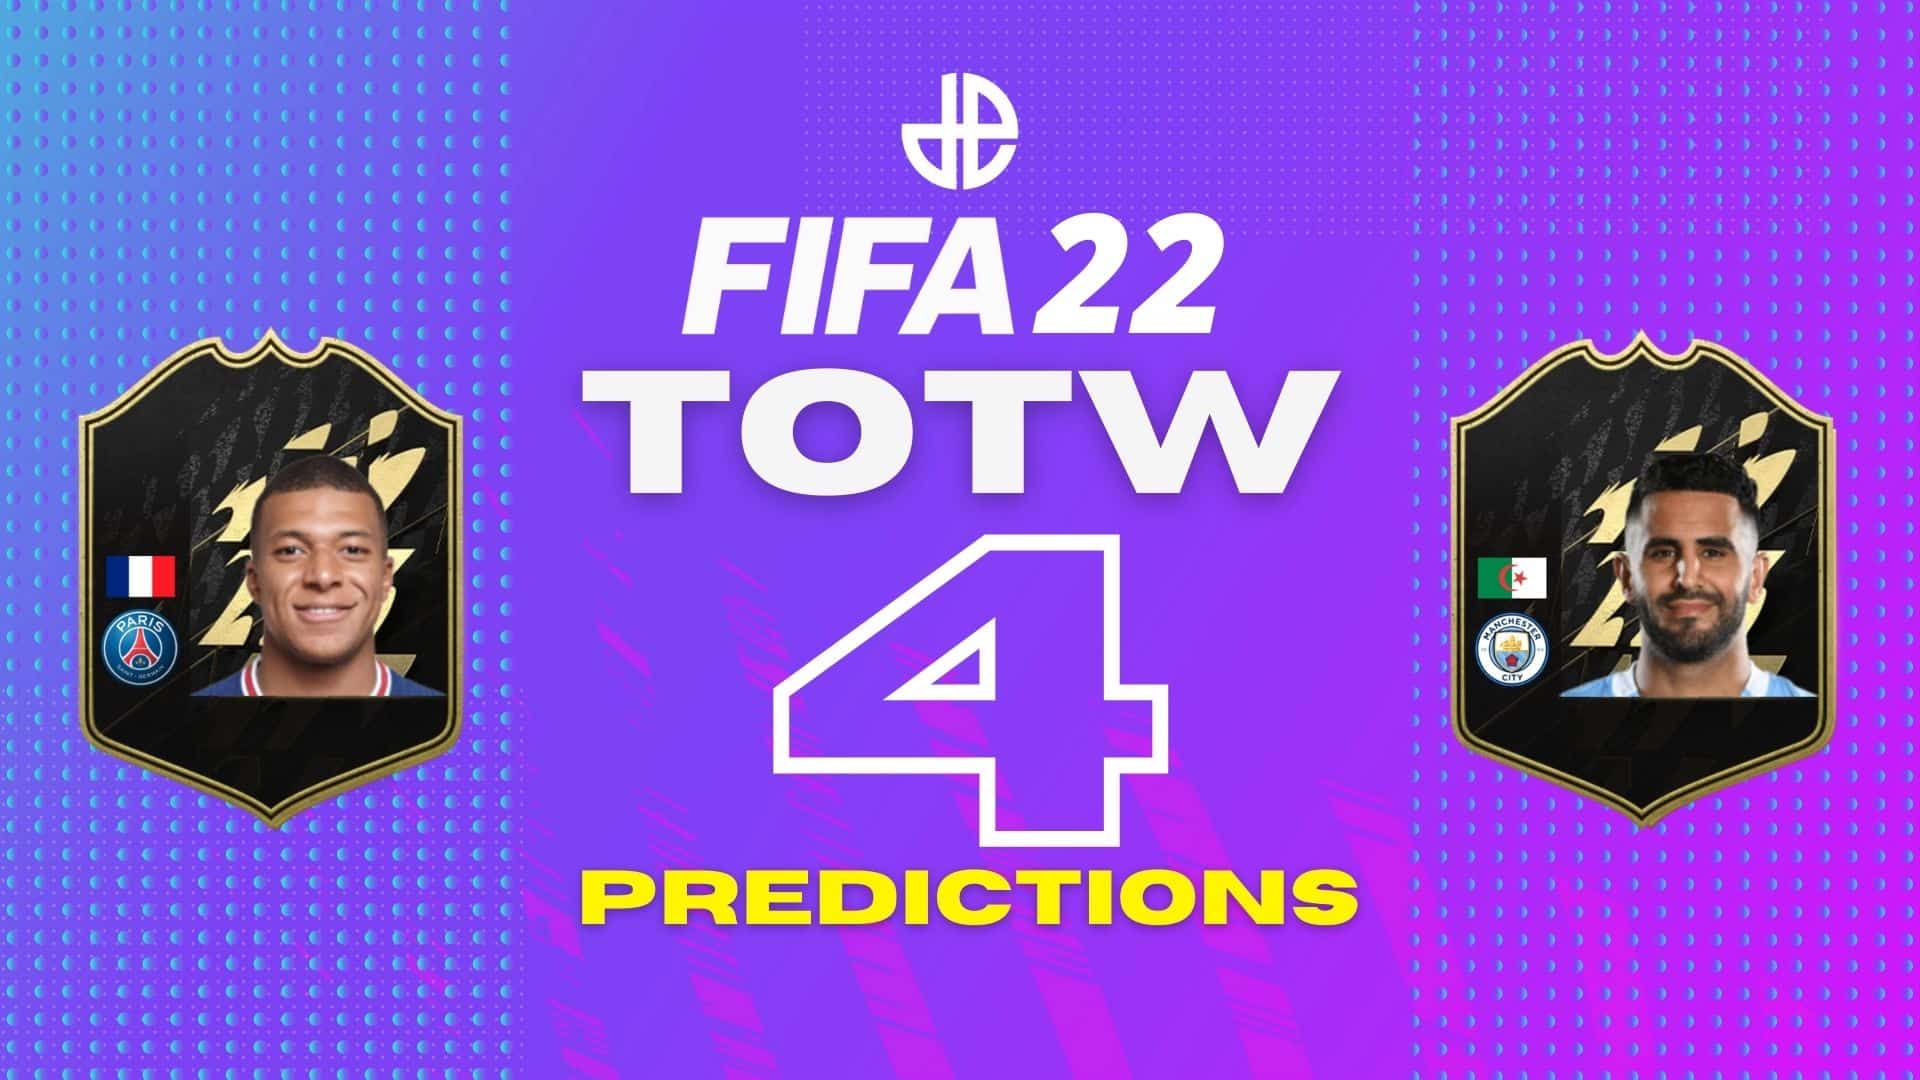 FIFA 22 TOTW 4 predictions for Ultimate Team with Mbappe and Mahrez cards